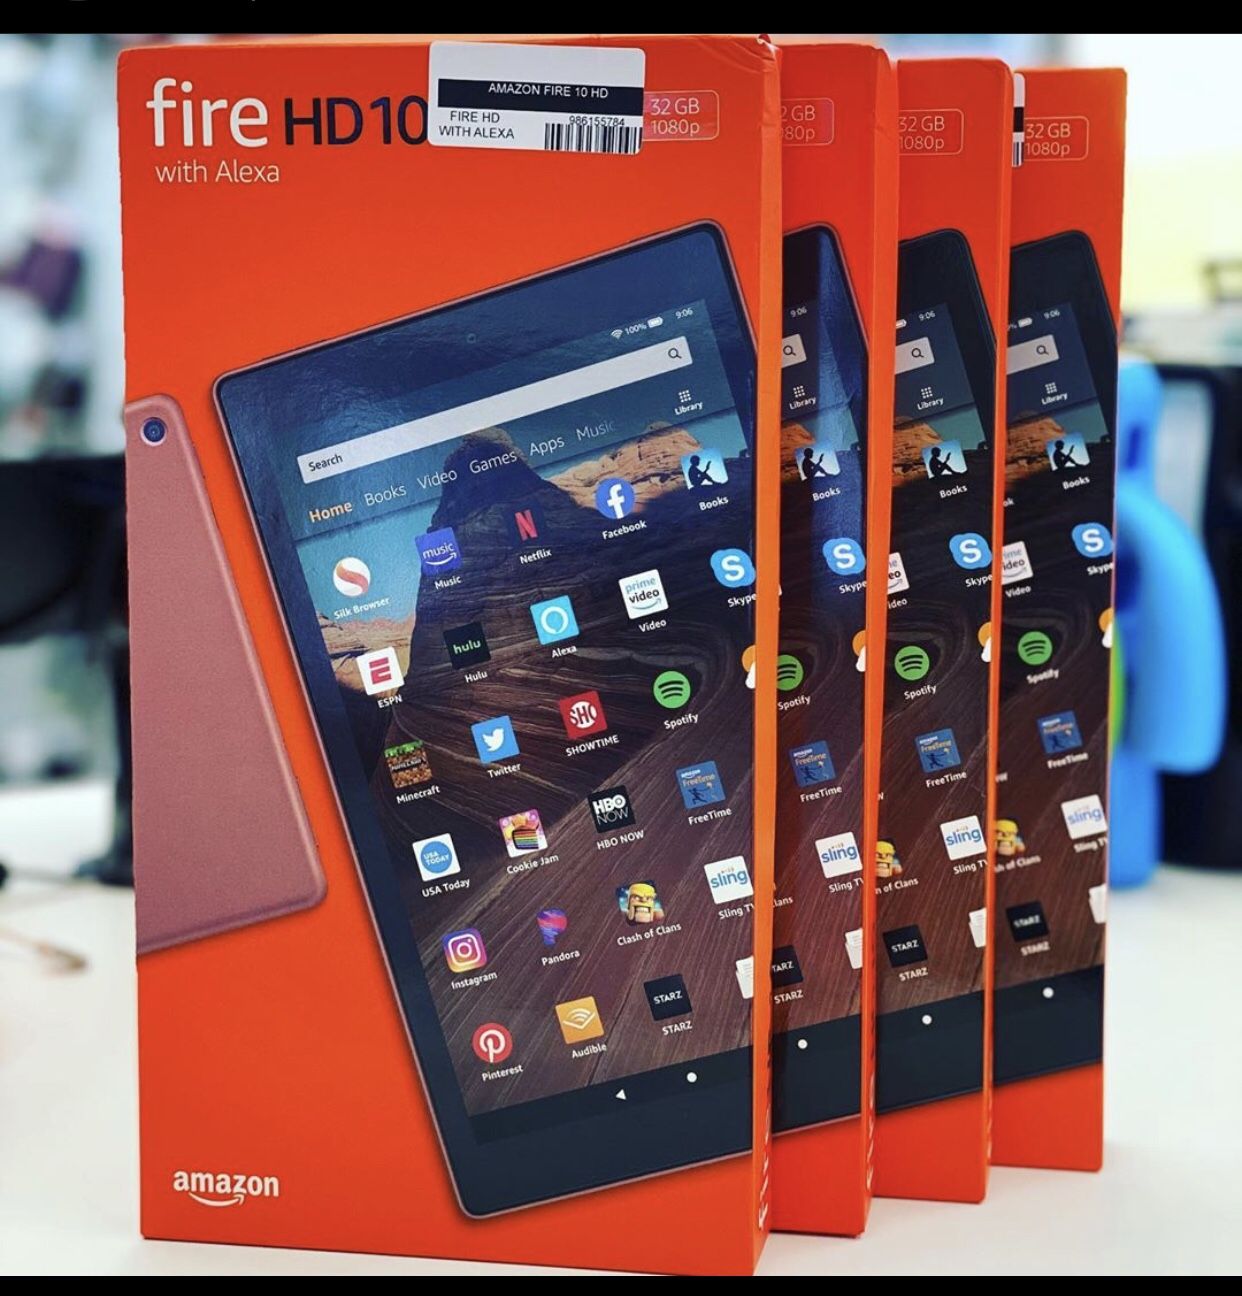 Amazon Fire tablets 7” and up